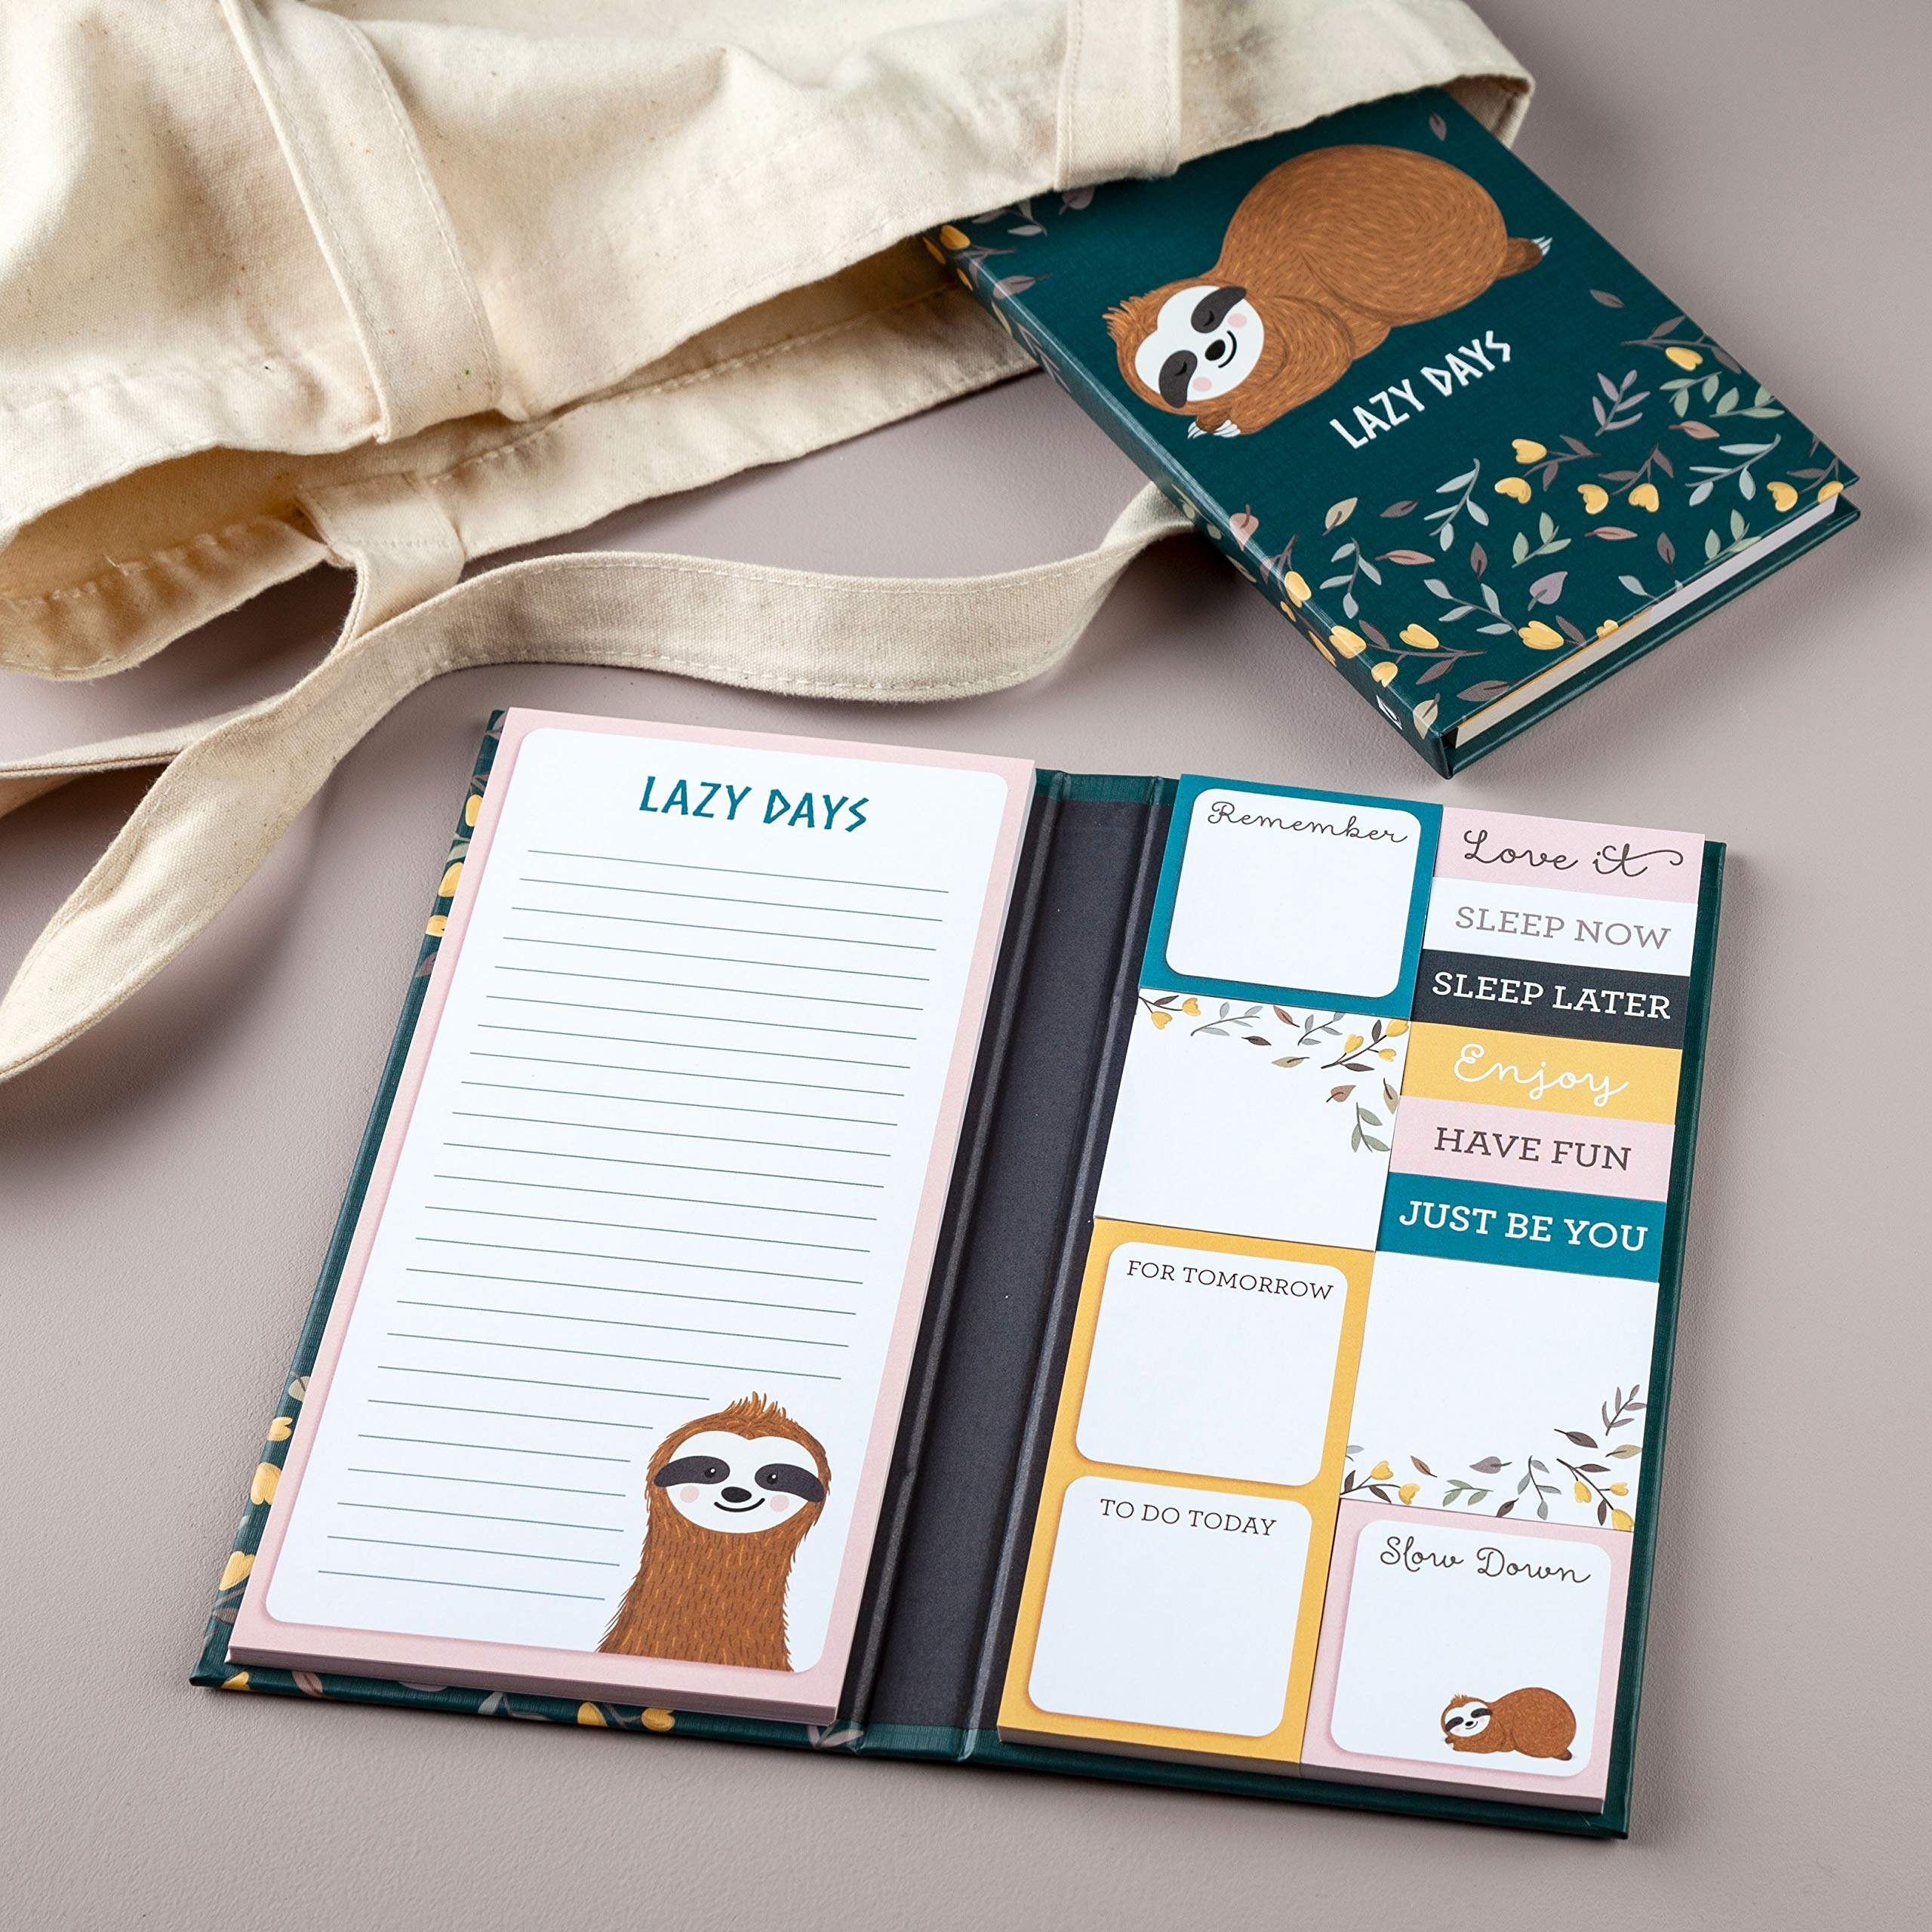 The sloth note set beside a tote bag